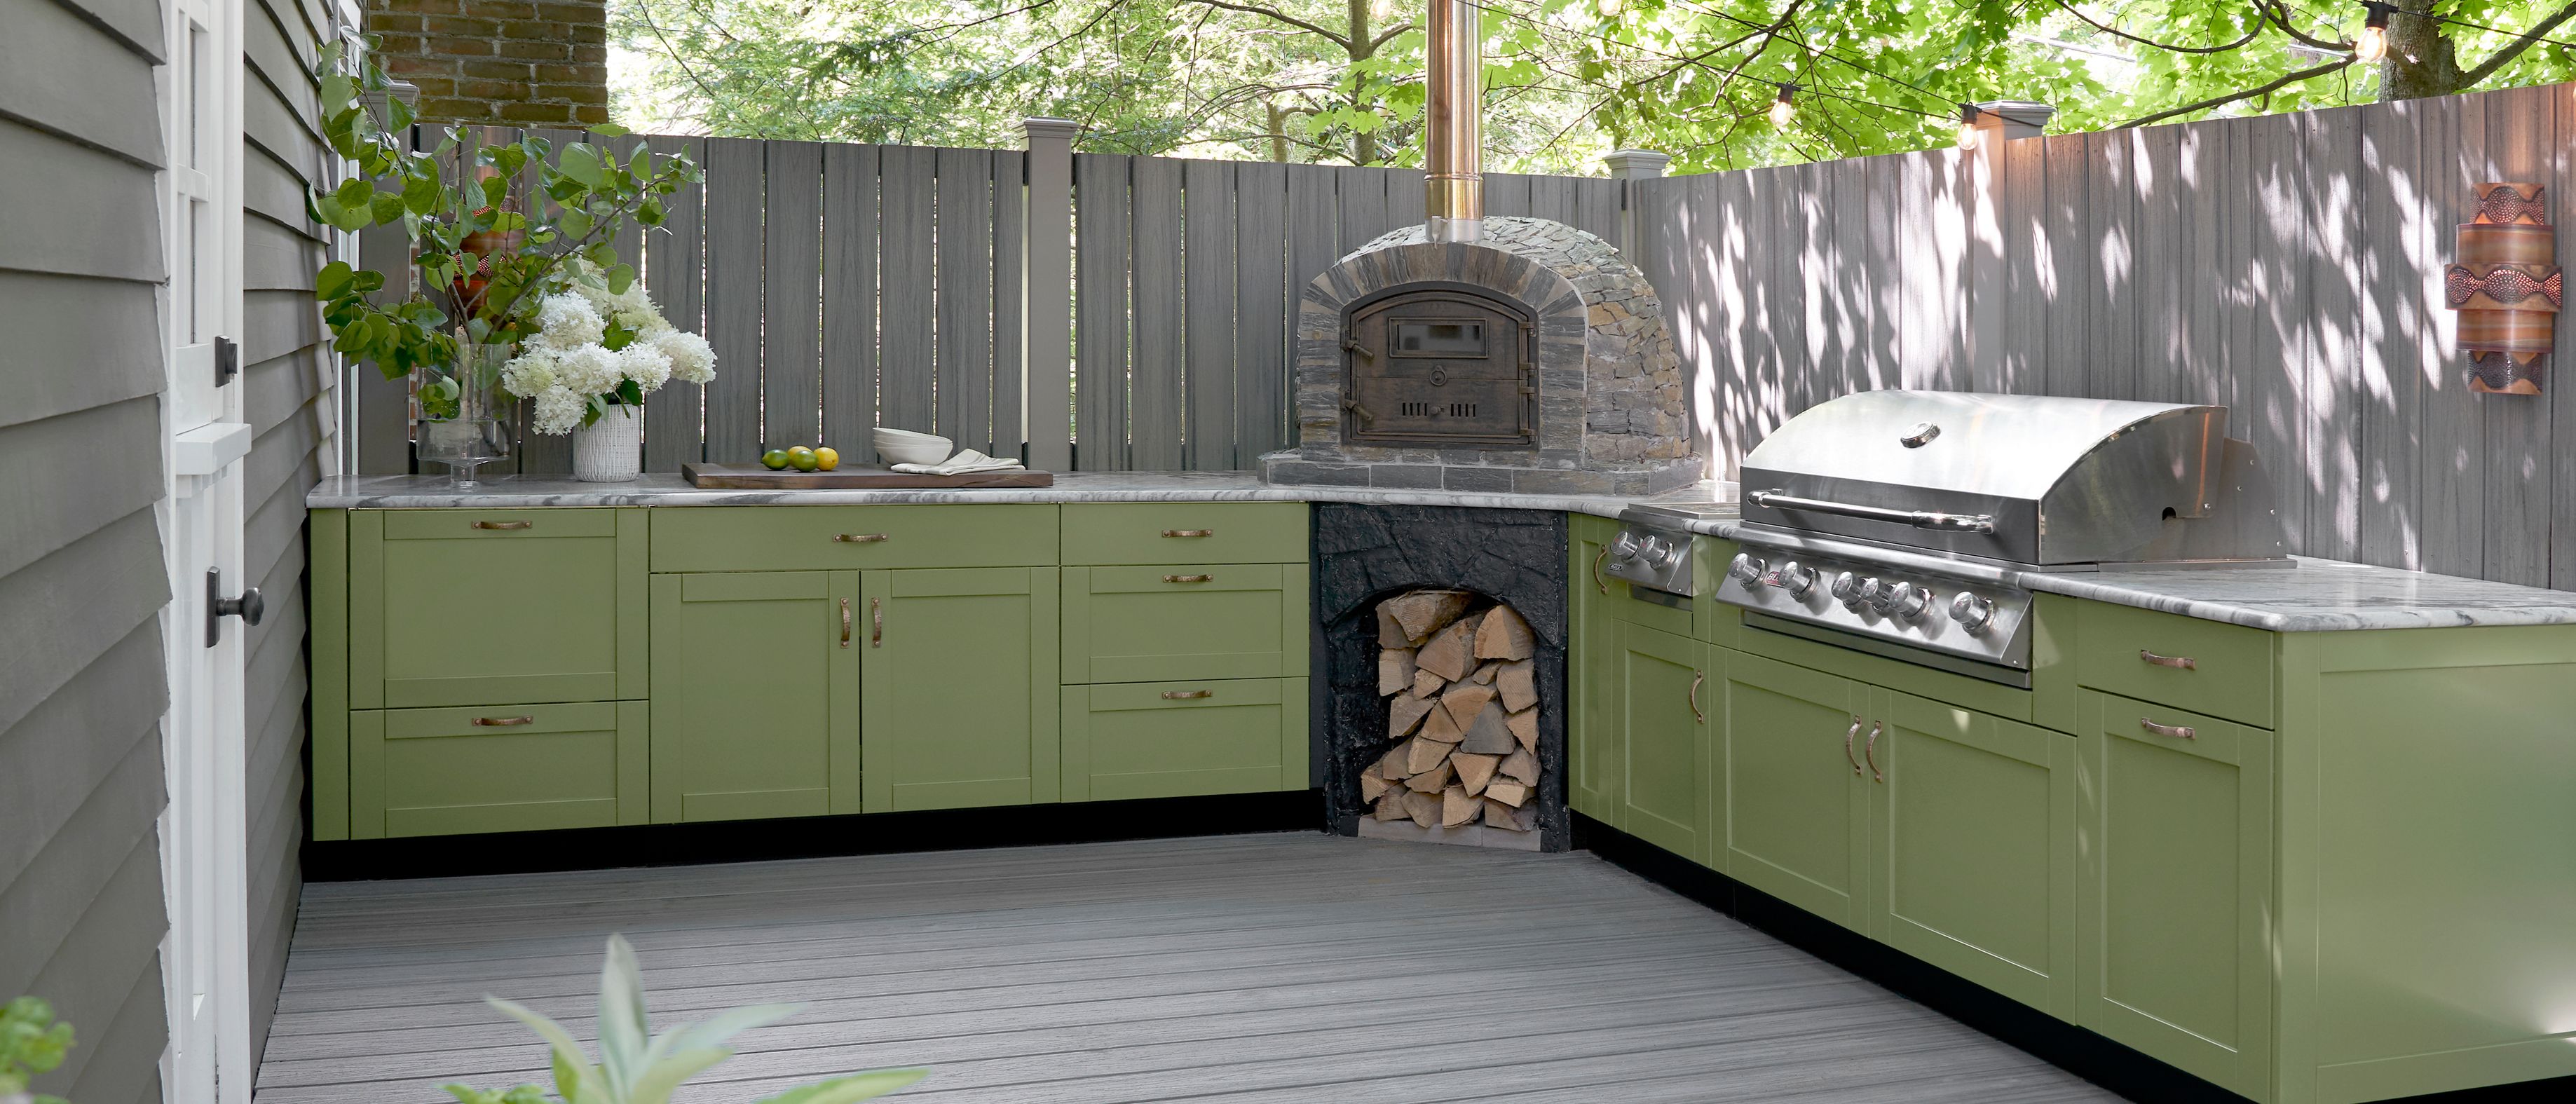 Love this stove top with griddle!  Kitchen inspirations, Outdoor